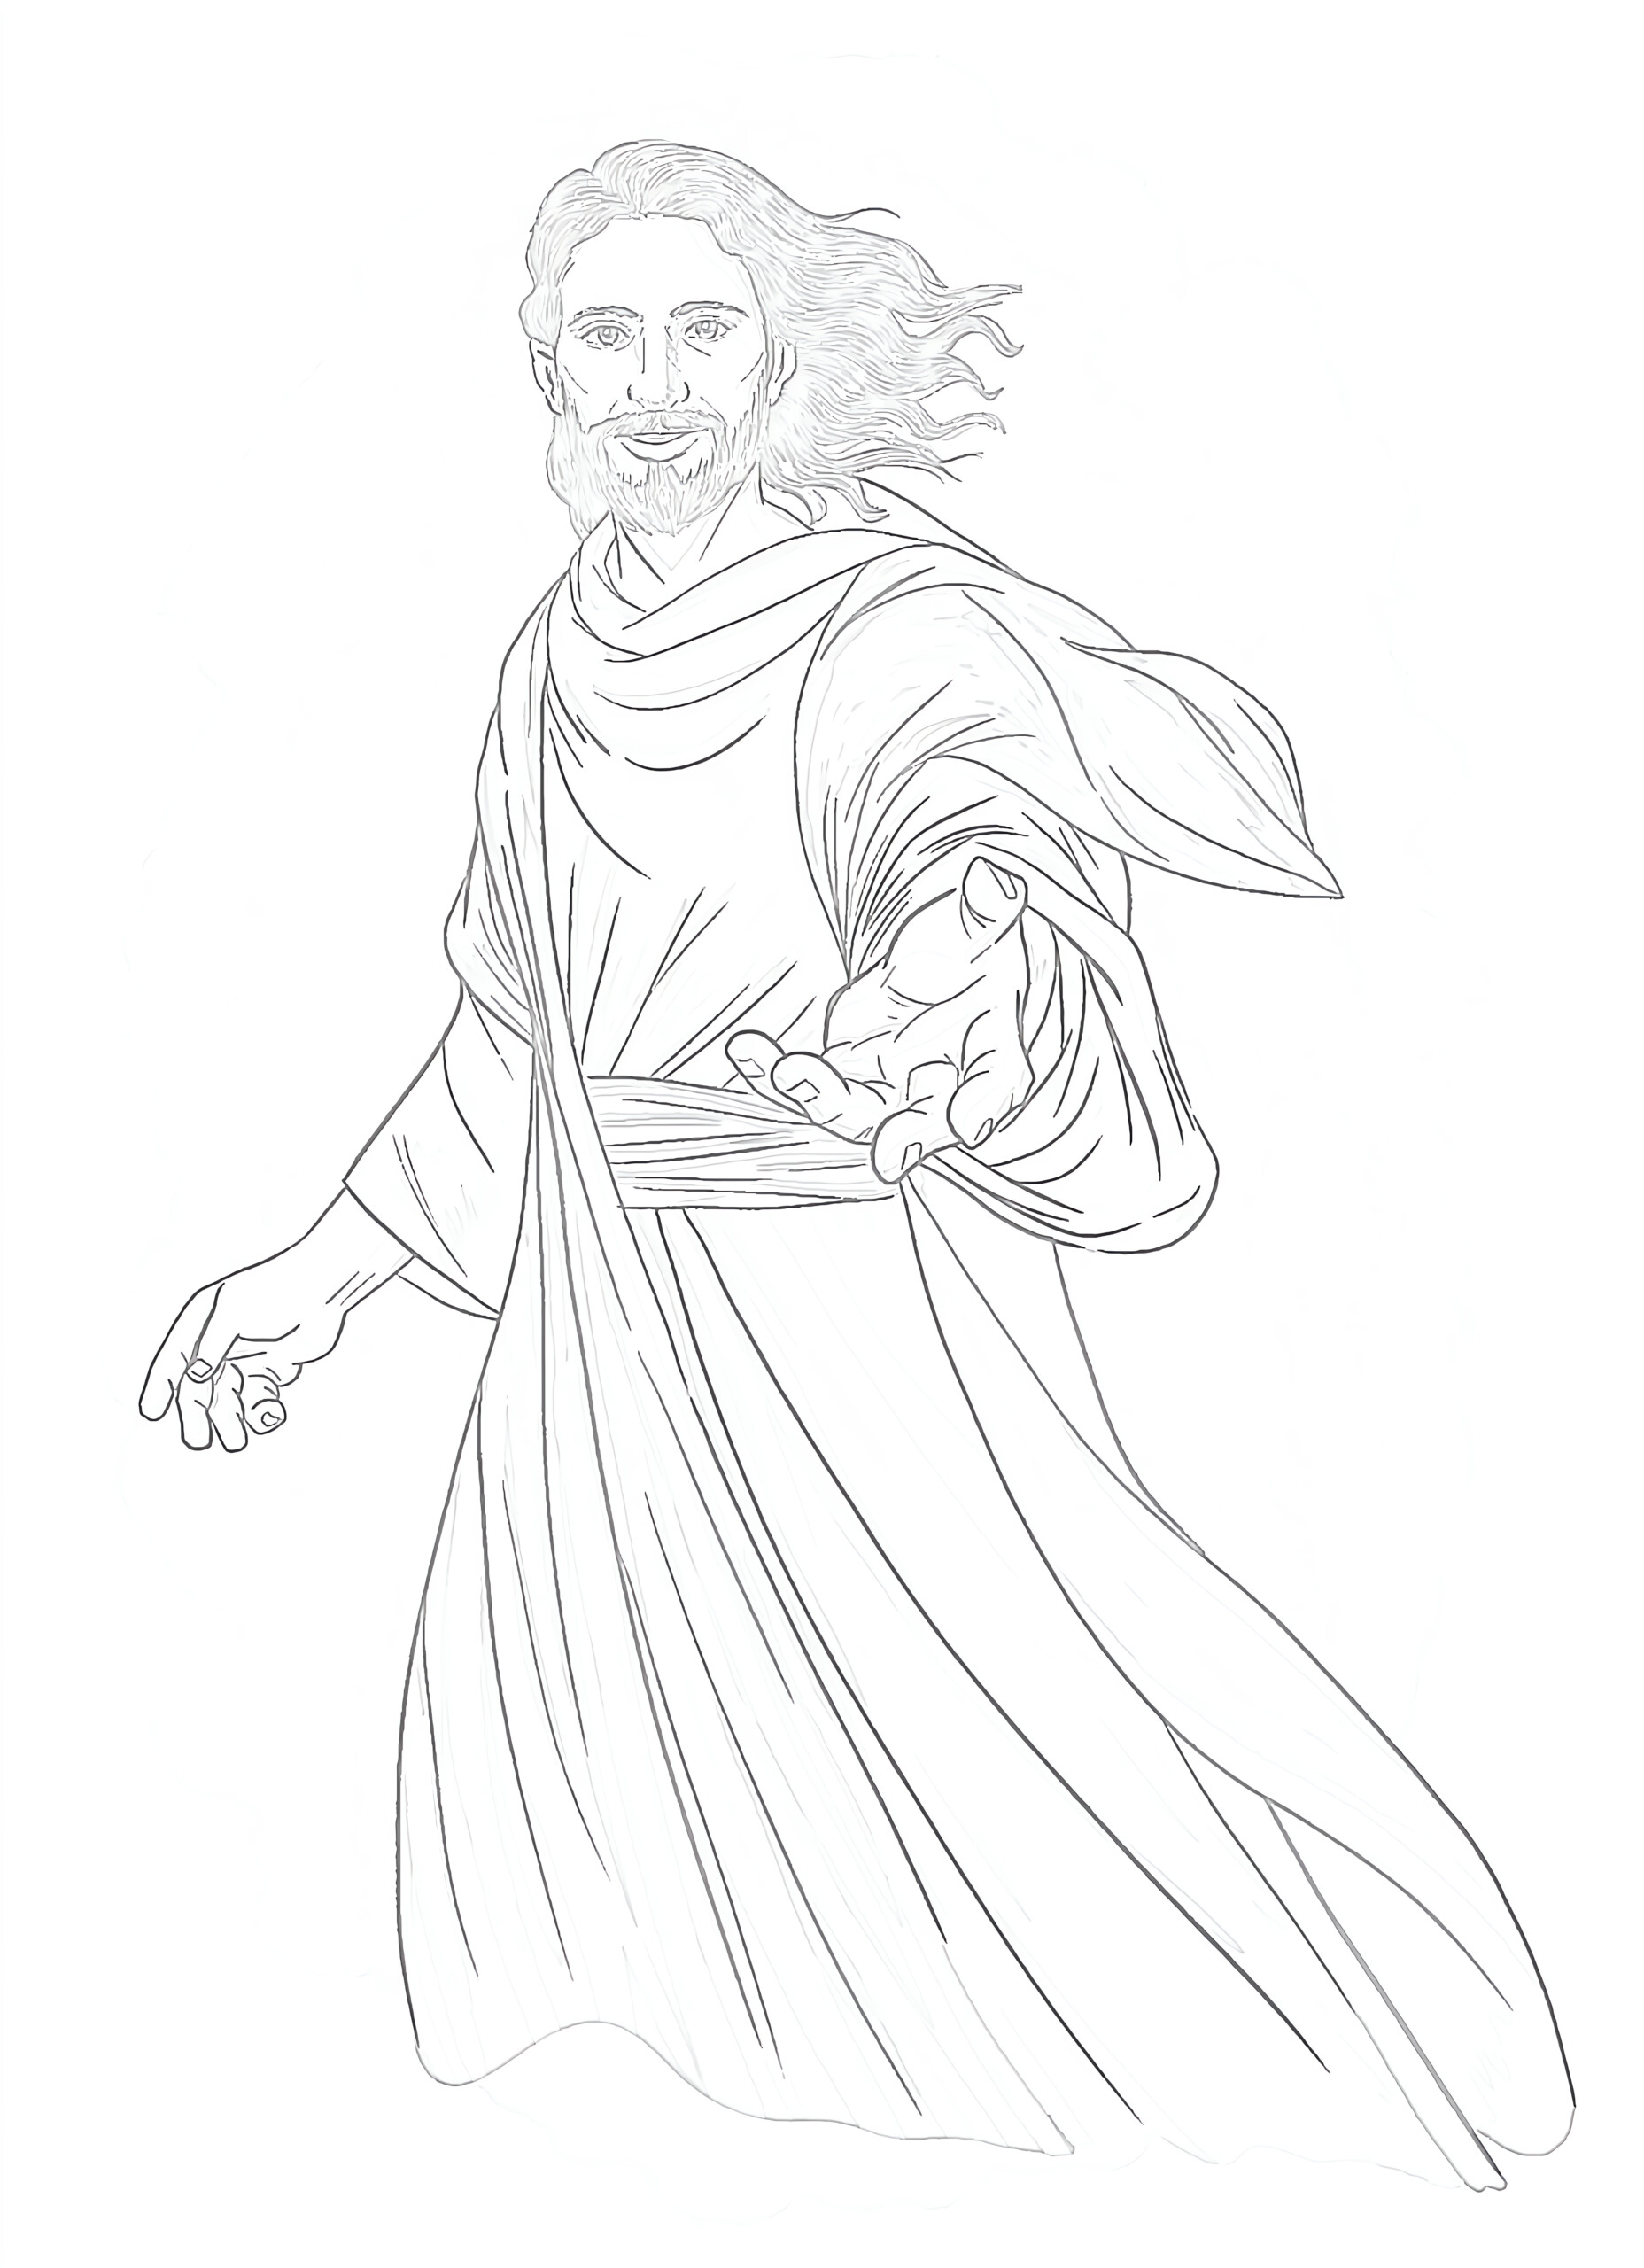 Jesus With An Open Hand - Coloring page